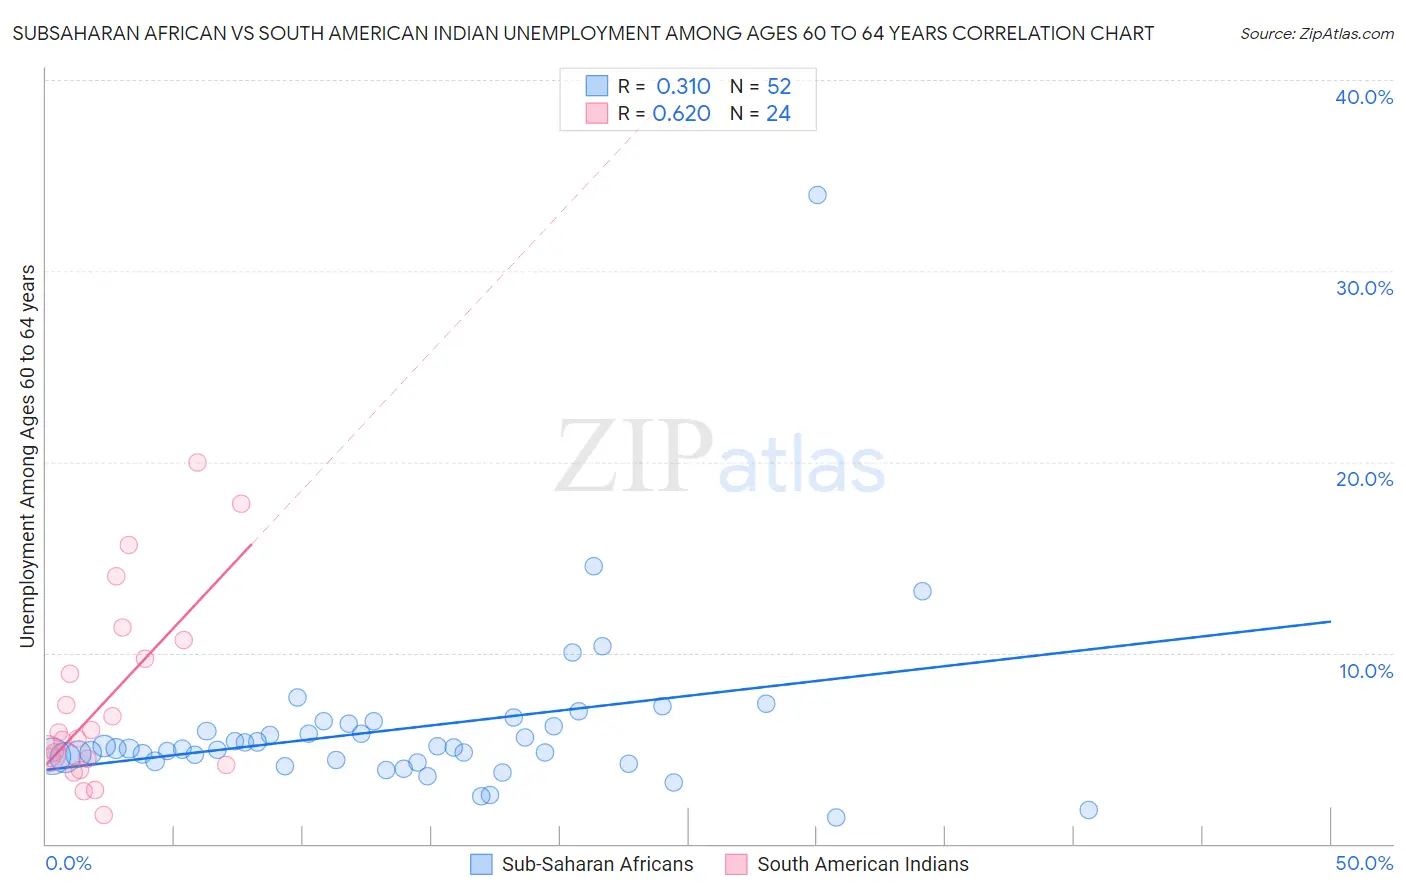 Subsaharan African vs South American Indian Unemployment Among Ages 60 to 64 years